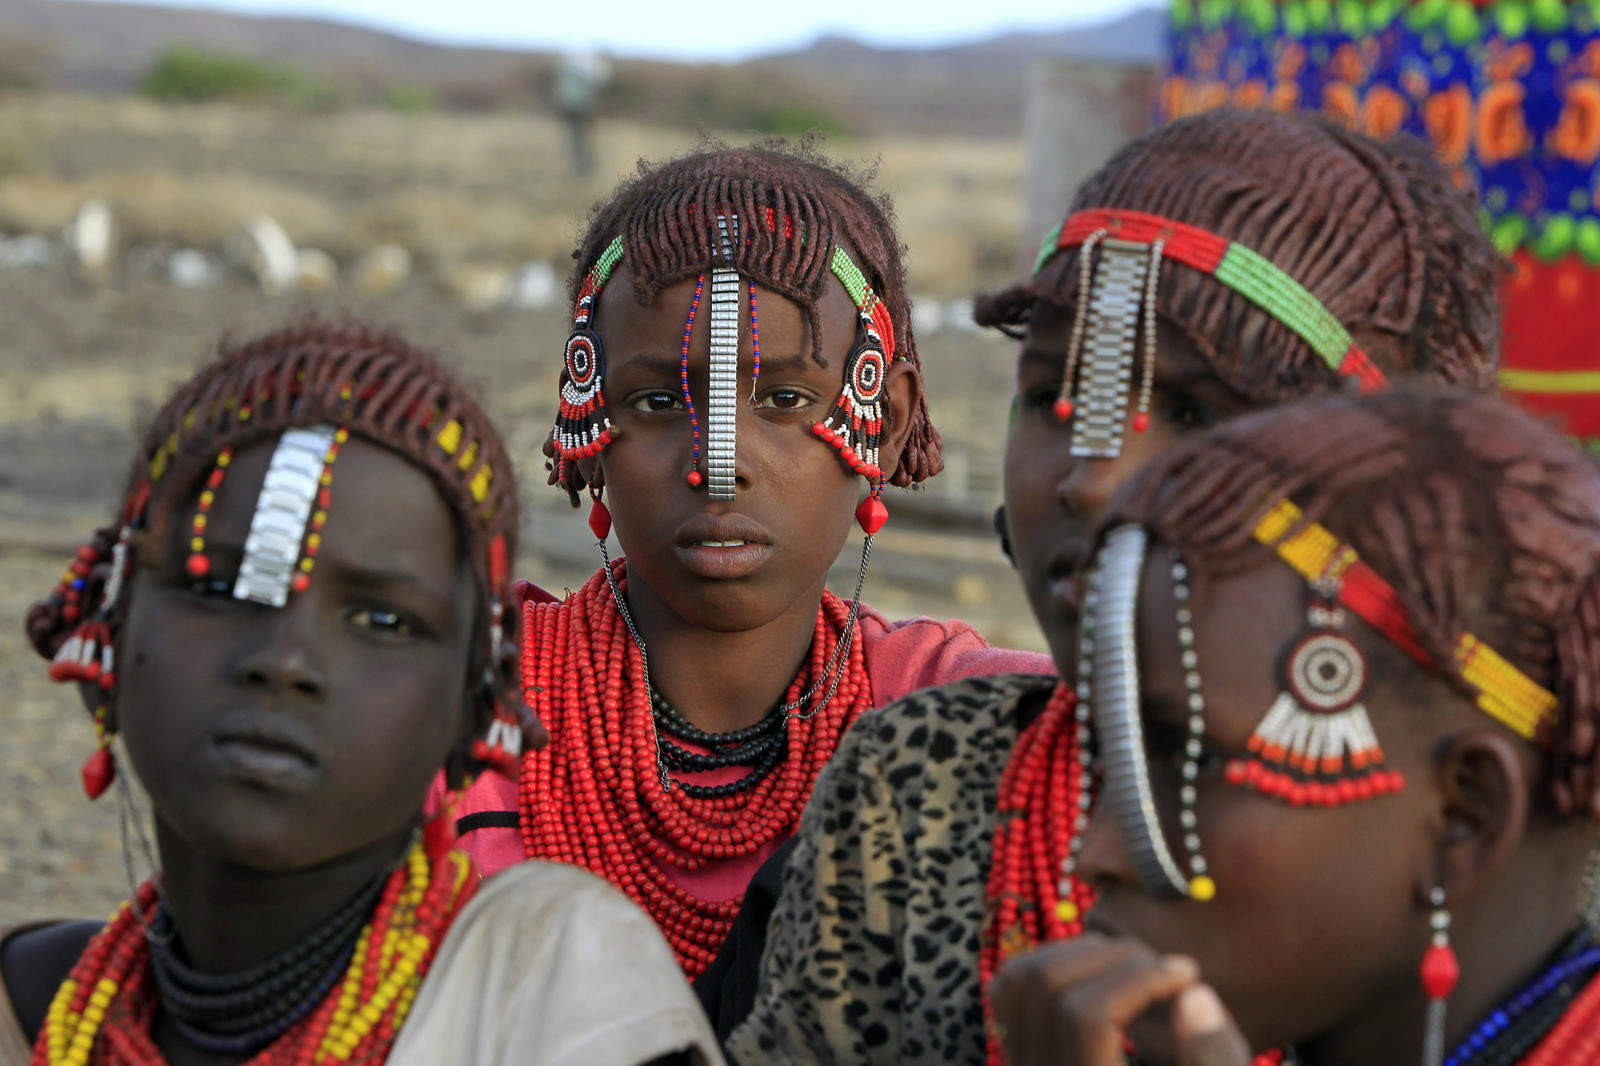 Girls from Daasanach tribe sit outside their hut at venue of a welcoming ceremony for tourists ahead of hybrid solar eclipse expected to take place on Sunday, at Sibiloi National Park on shores of Lake Turkana